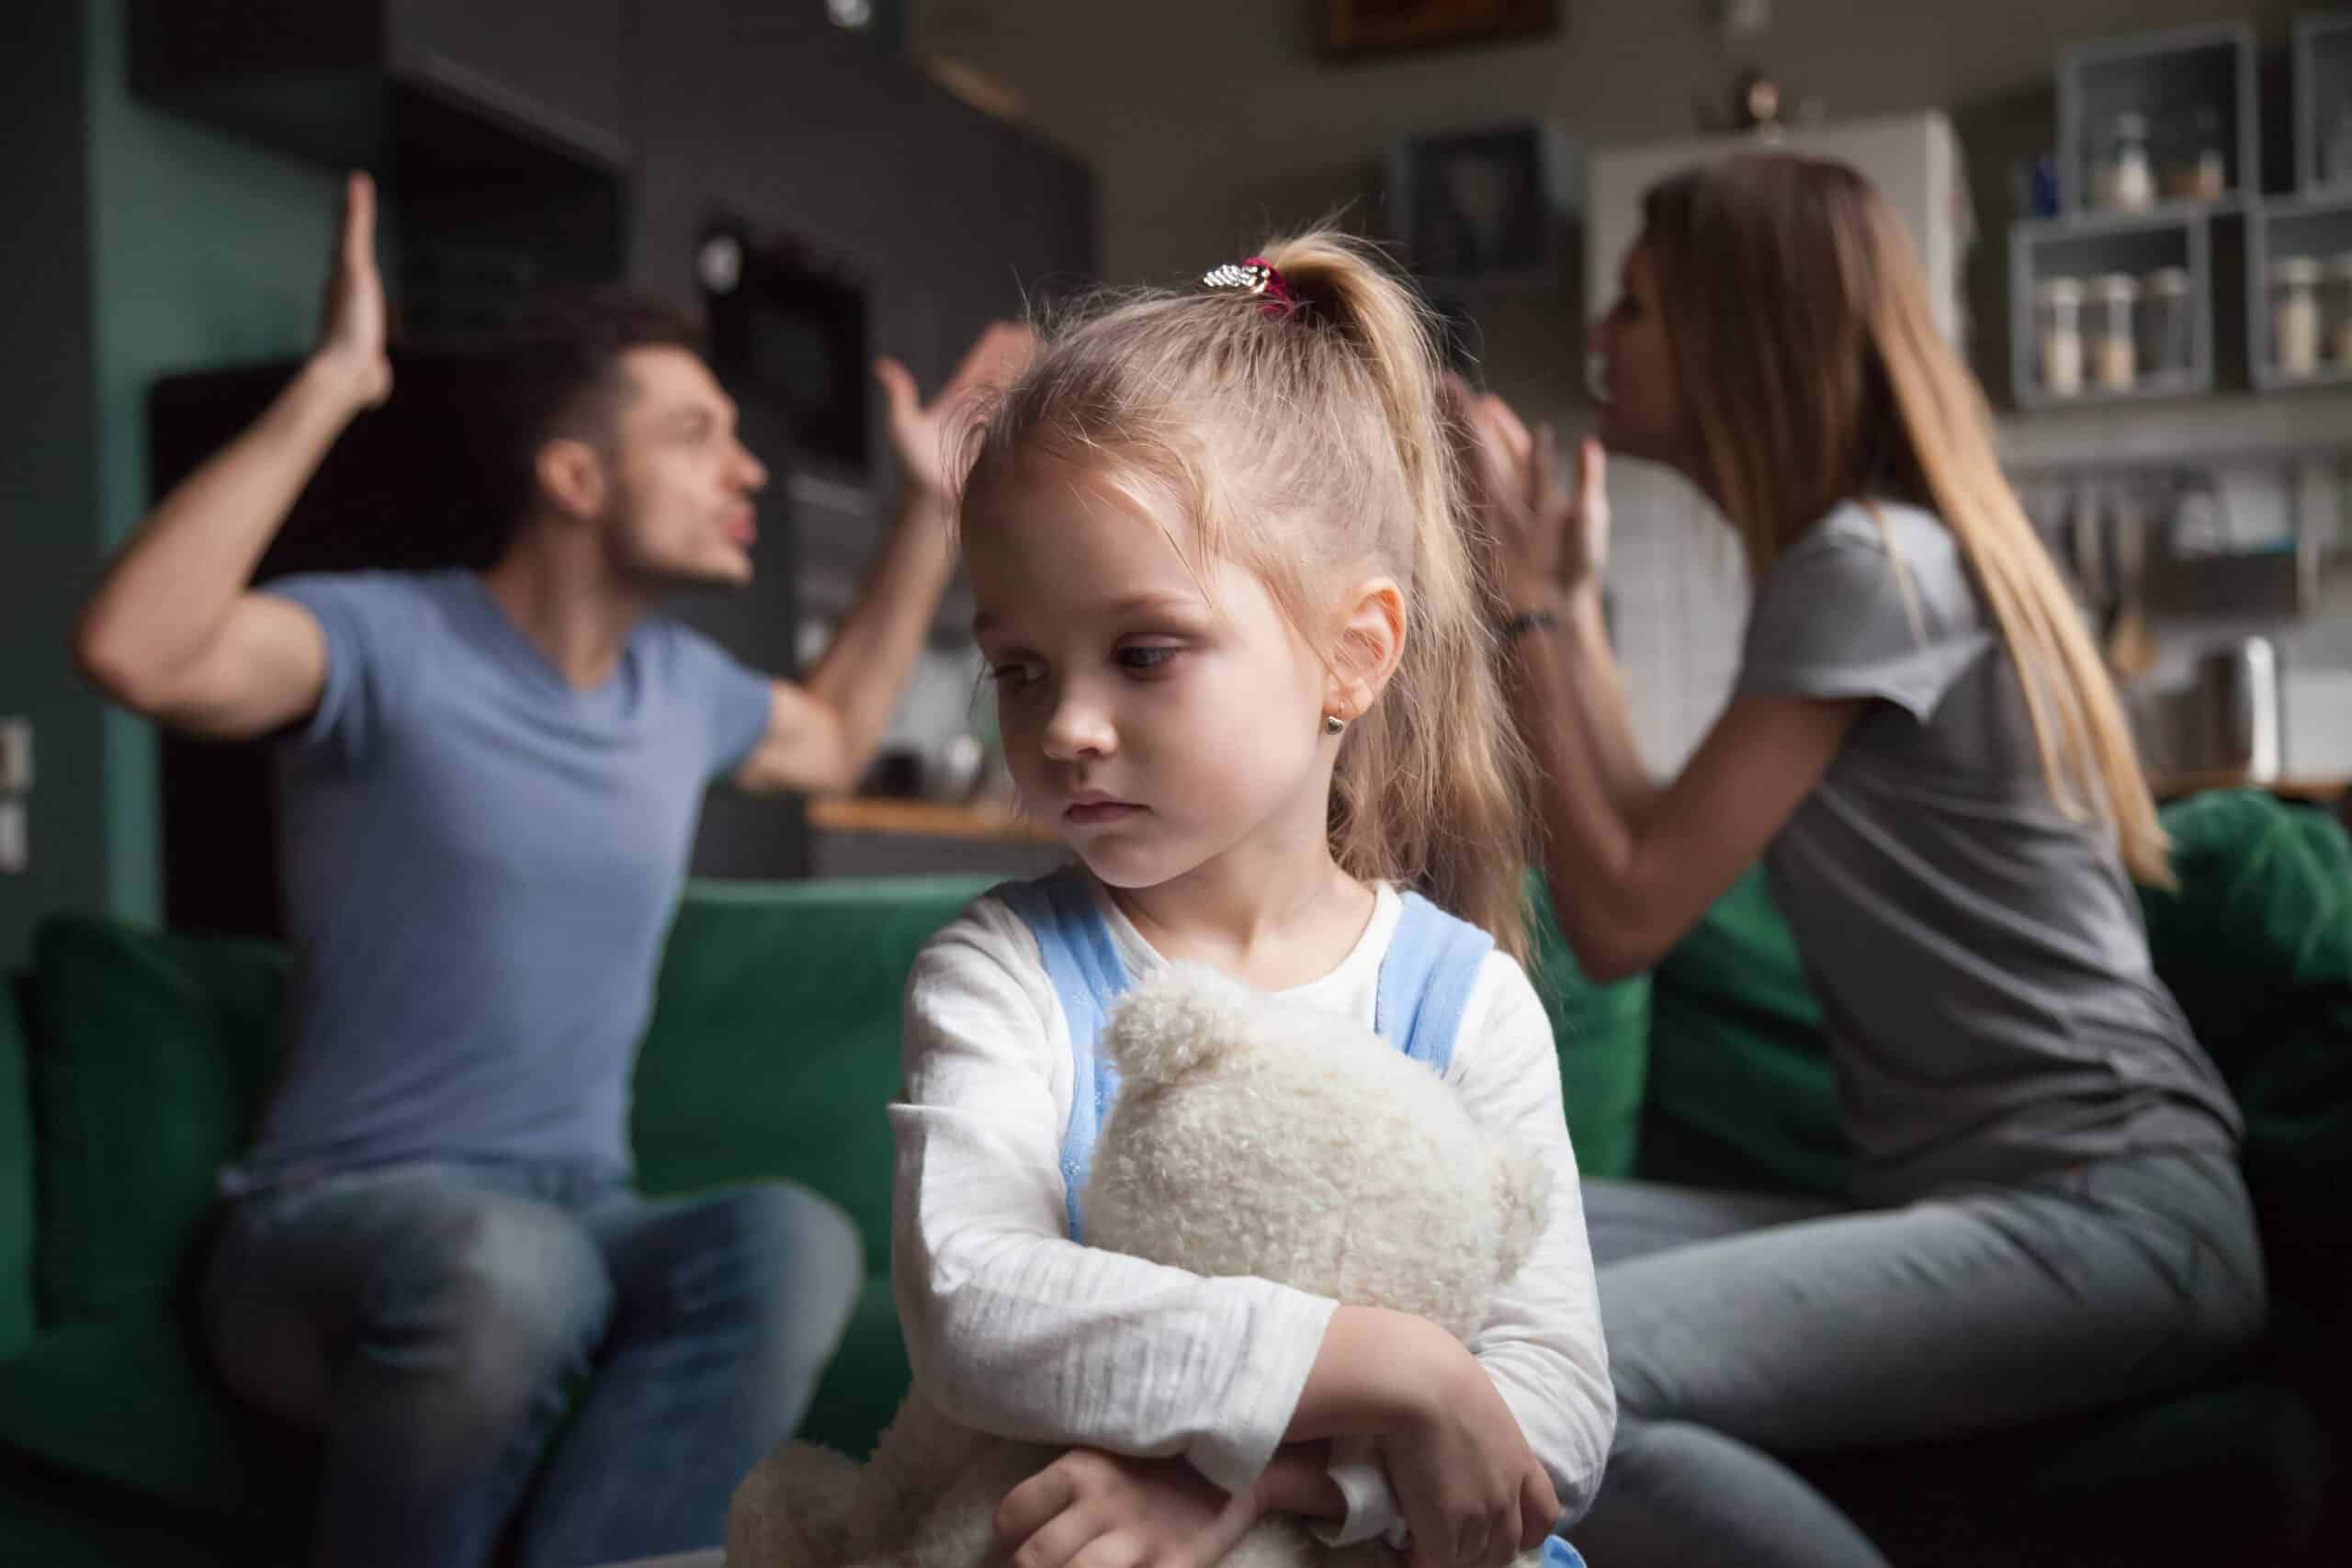 How Do I Make My Kids Know That It Isn’t Their Fault in Divorce?